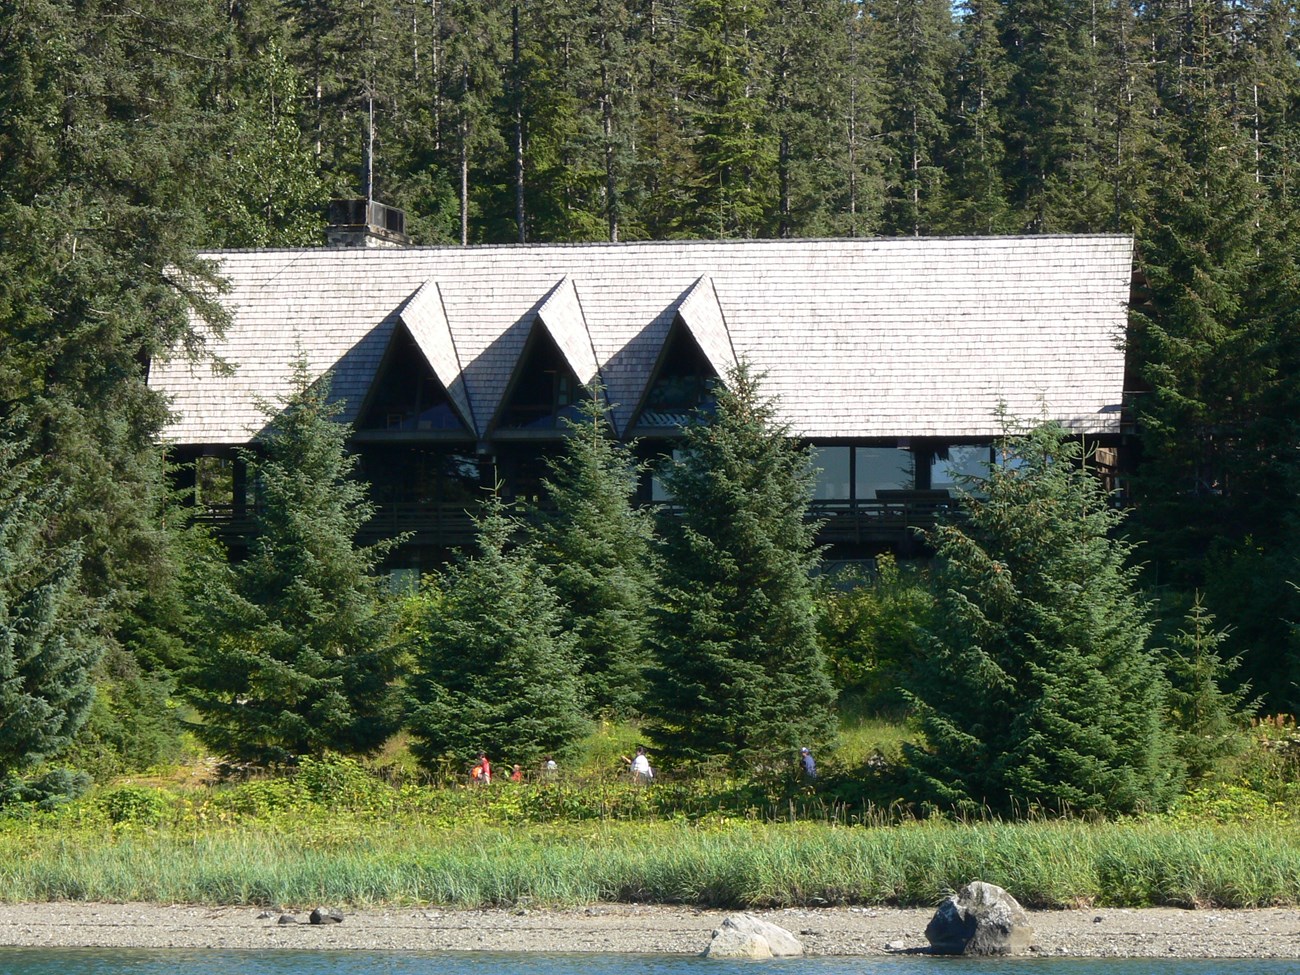 Three angular dormer windows stand out on the glacier bay lodge's shingled roof, and the chimney and dining room windows are the only details visible through spruce trees. A small group of people can be seen amongst green vegetation, walking.